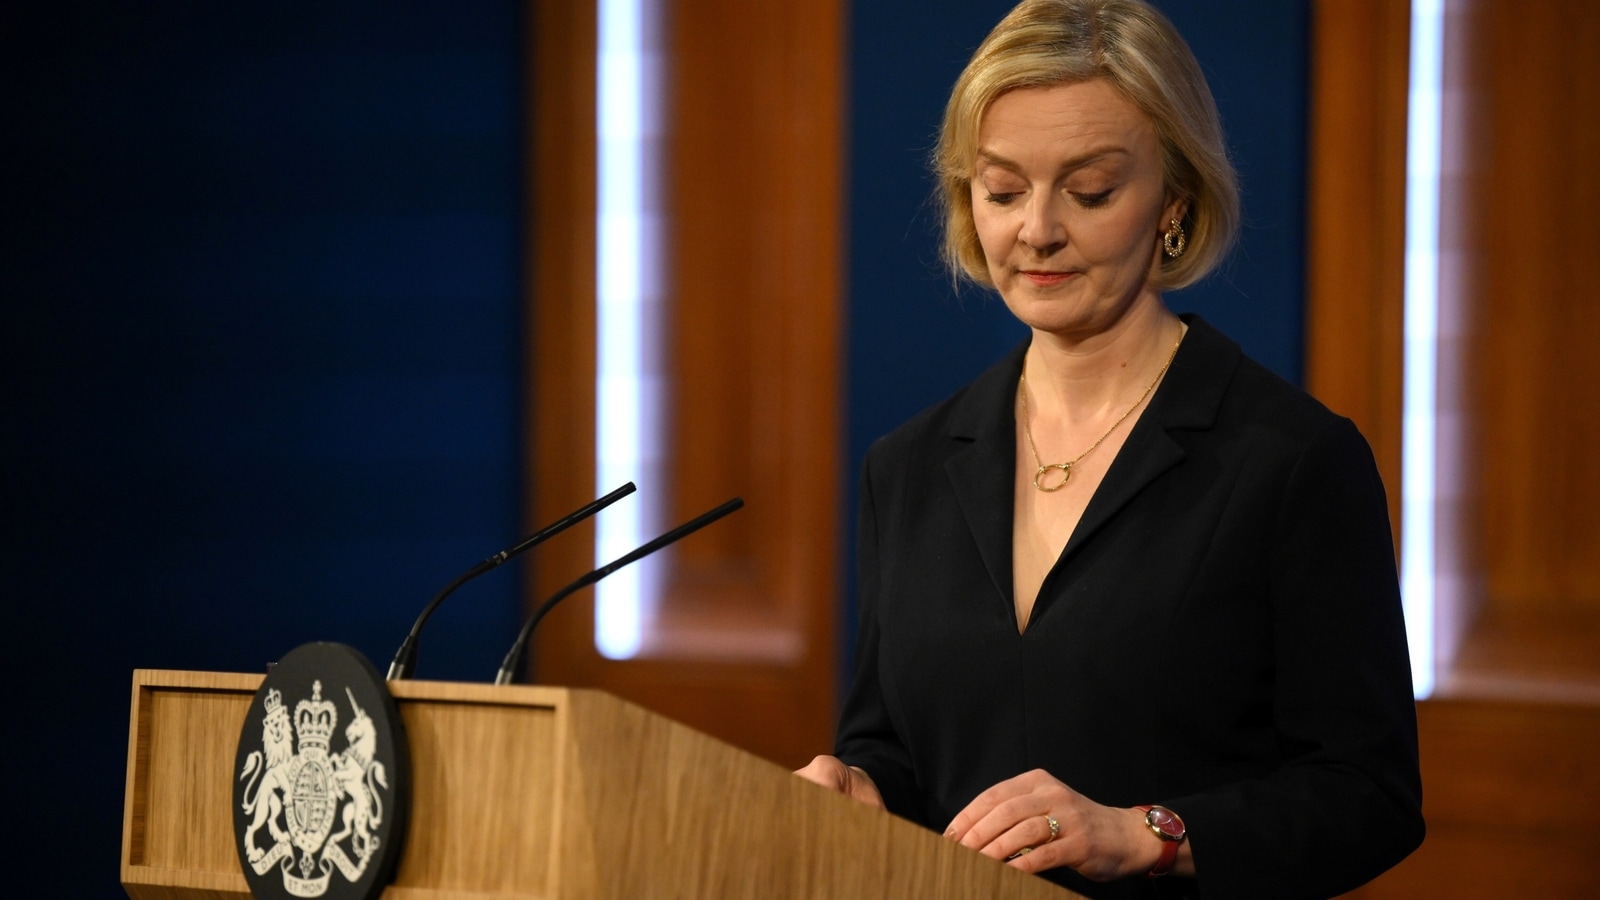 living-in-state-of-fear-180-hindu-groups-in-open-letter-to-liz-truss-after-leicester-violence